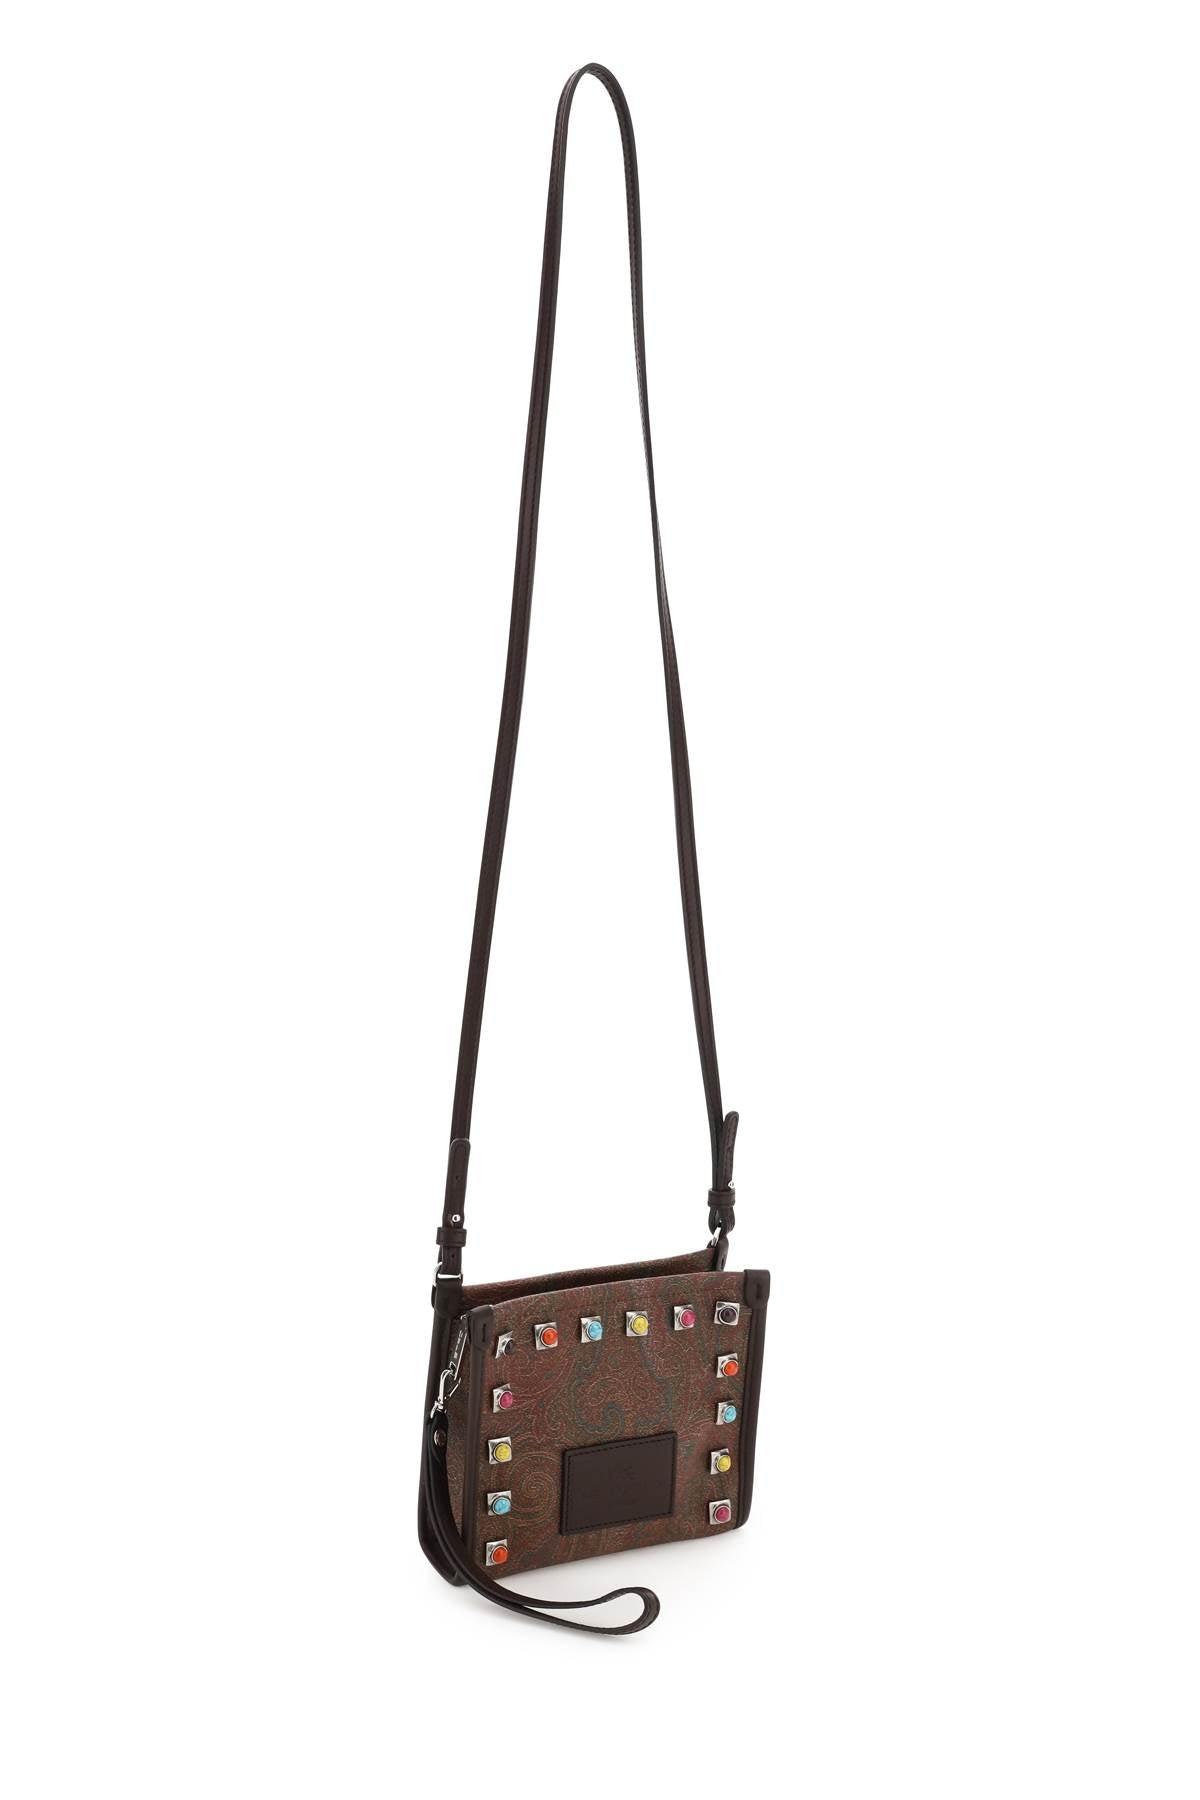 Womens Shoulder bags Etro Shoulder bags - Save 19% Etro Leather Paisley Crossbody Bag With Studs & Stones in Red Brown 